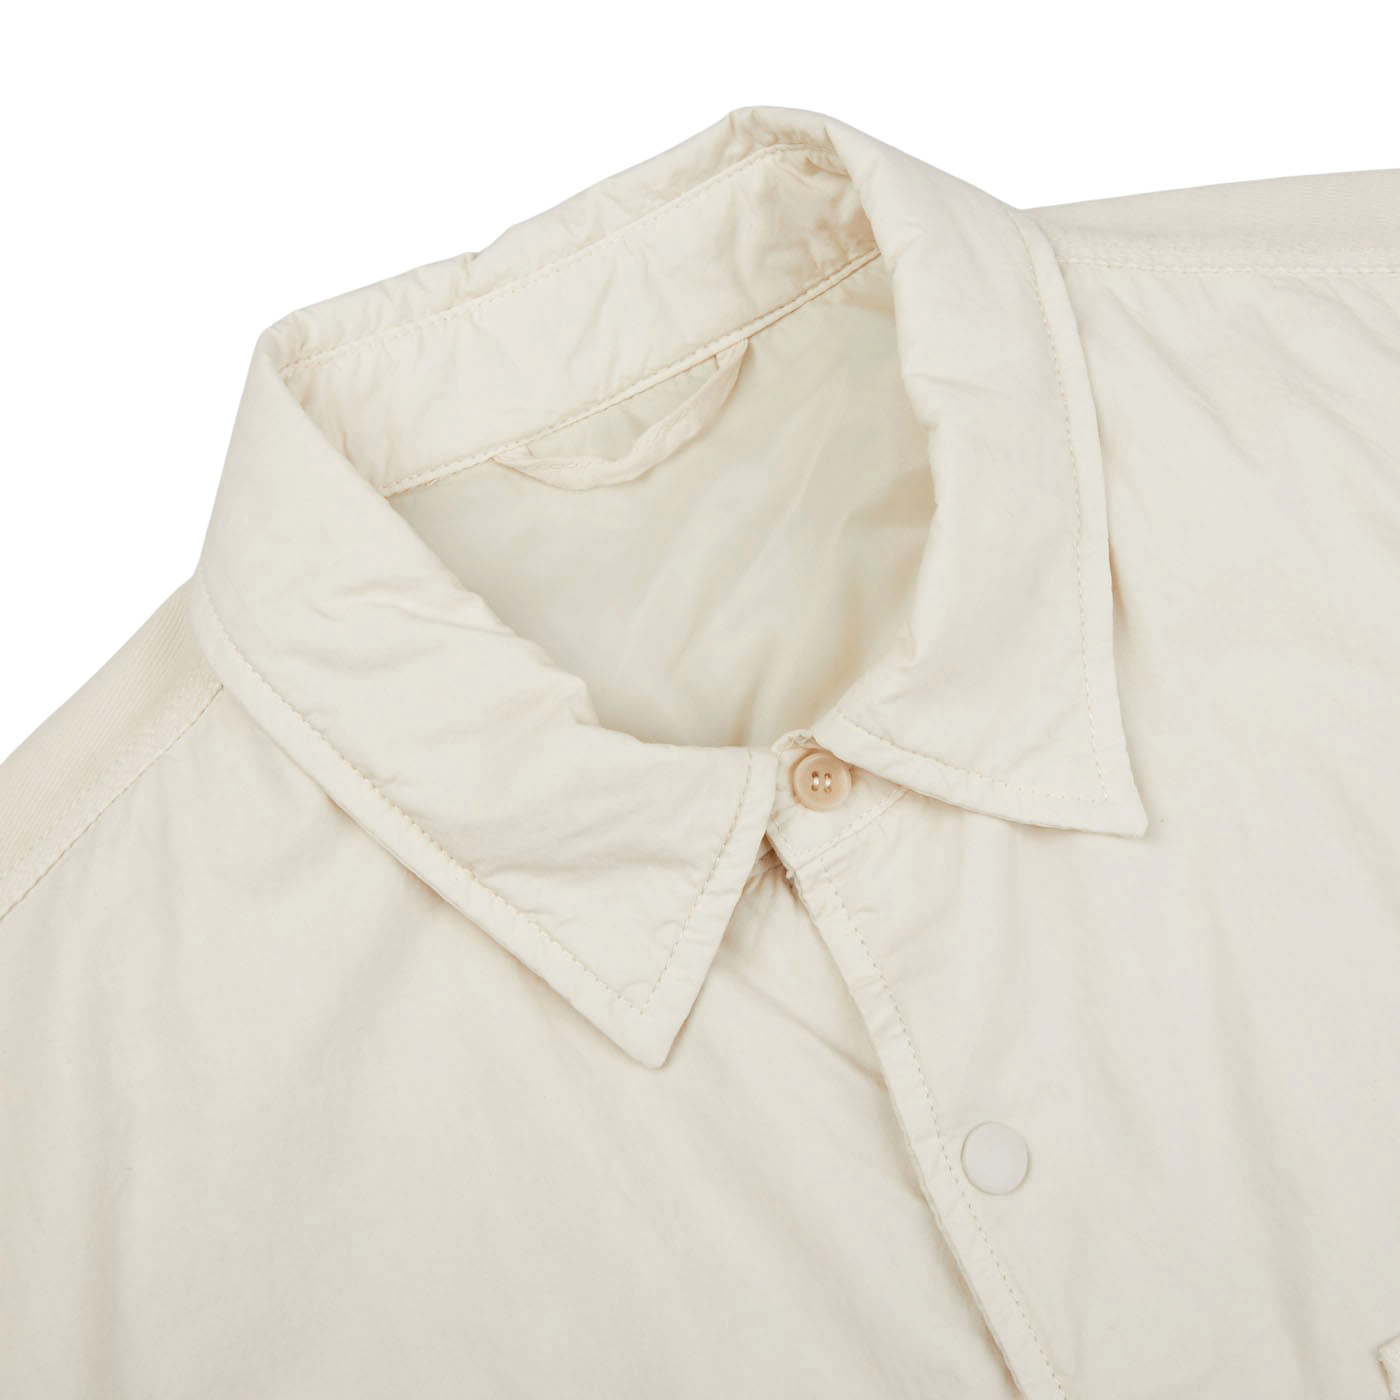 An Off-White Cotton Padded Overshirt by Aspesi with a button down collar.